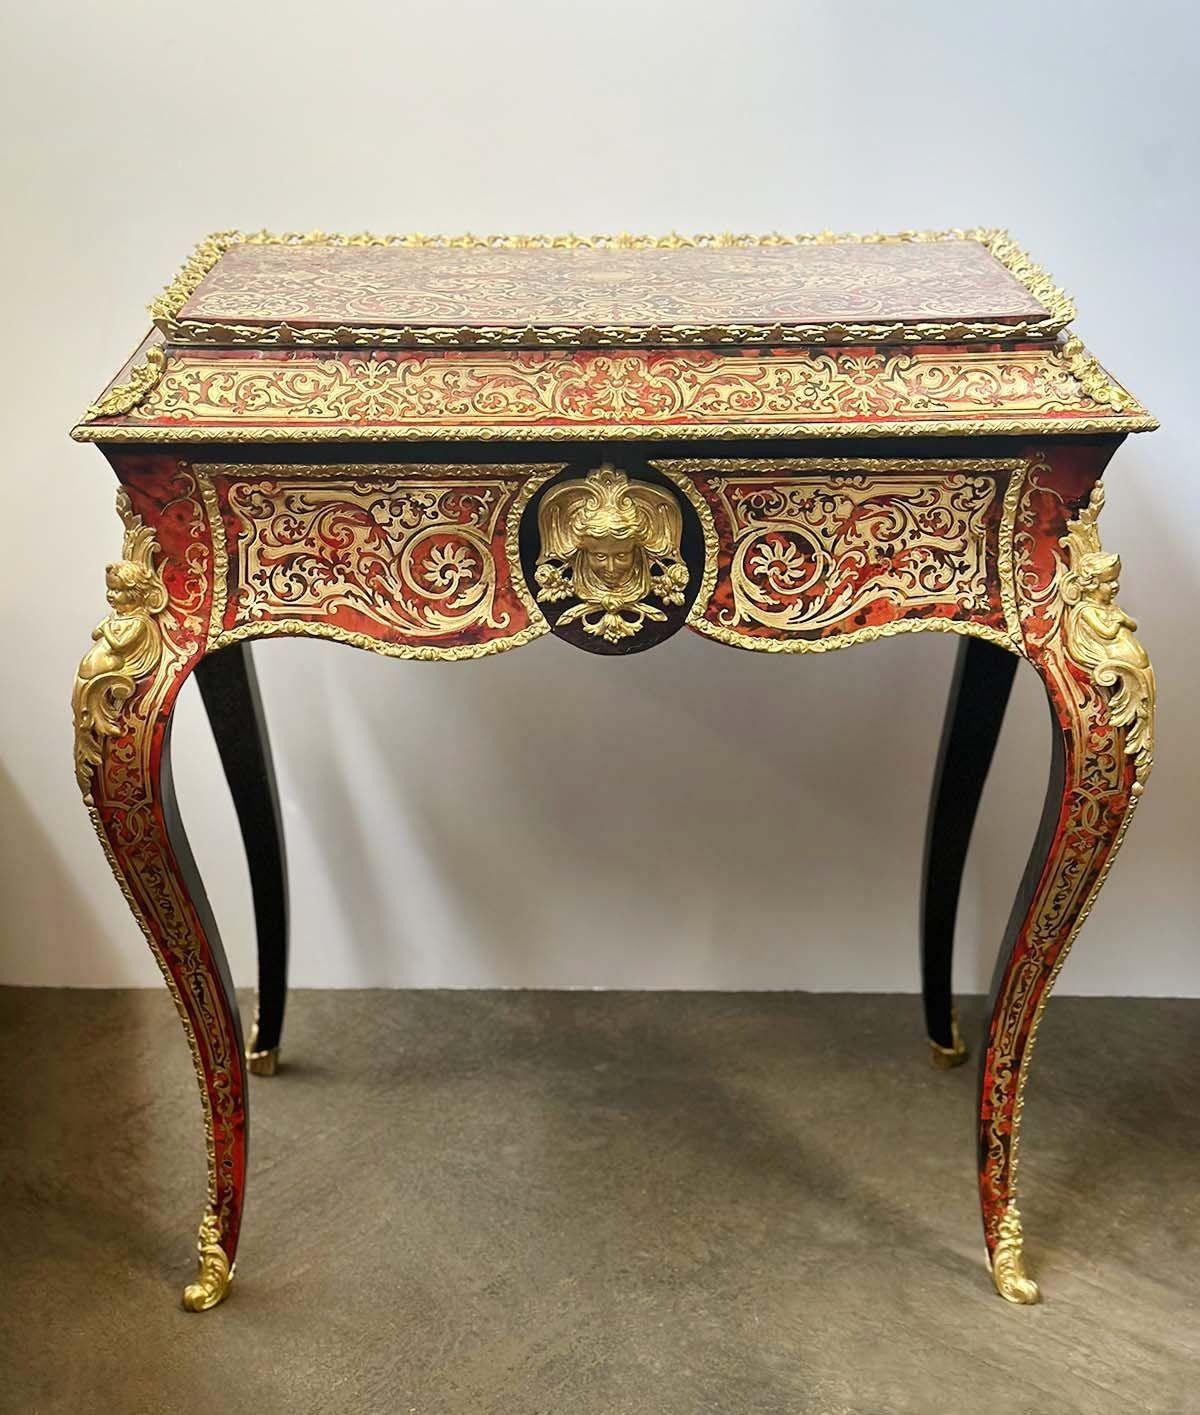 French Inlaid Boulle style jardiniere table converted into a vanity table. Beautiful brass gallery and inlaid all around the piece, accompanied with gilt brass putti mounts and a female head figure upfront.
Dimensions:
29.5